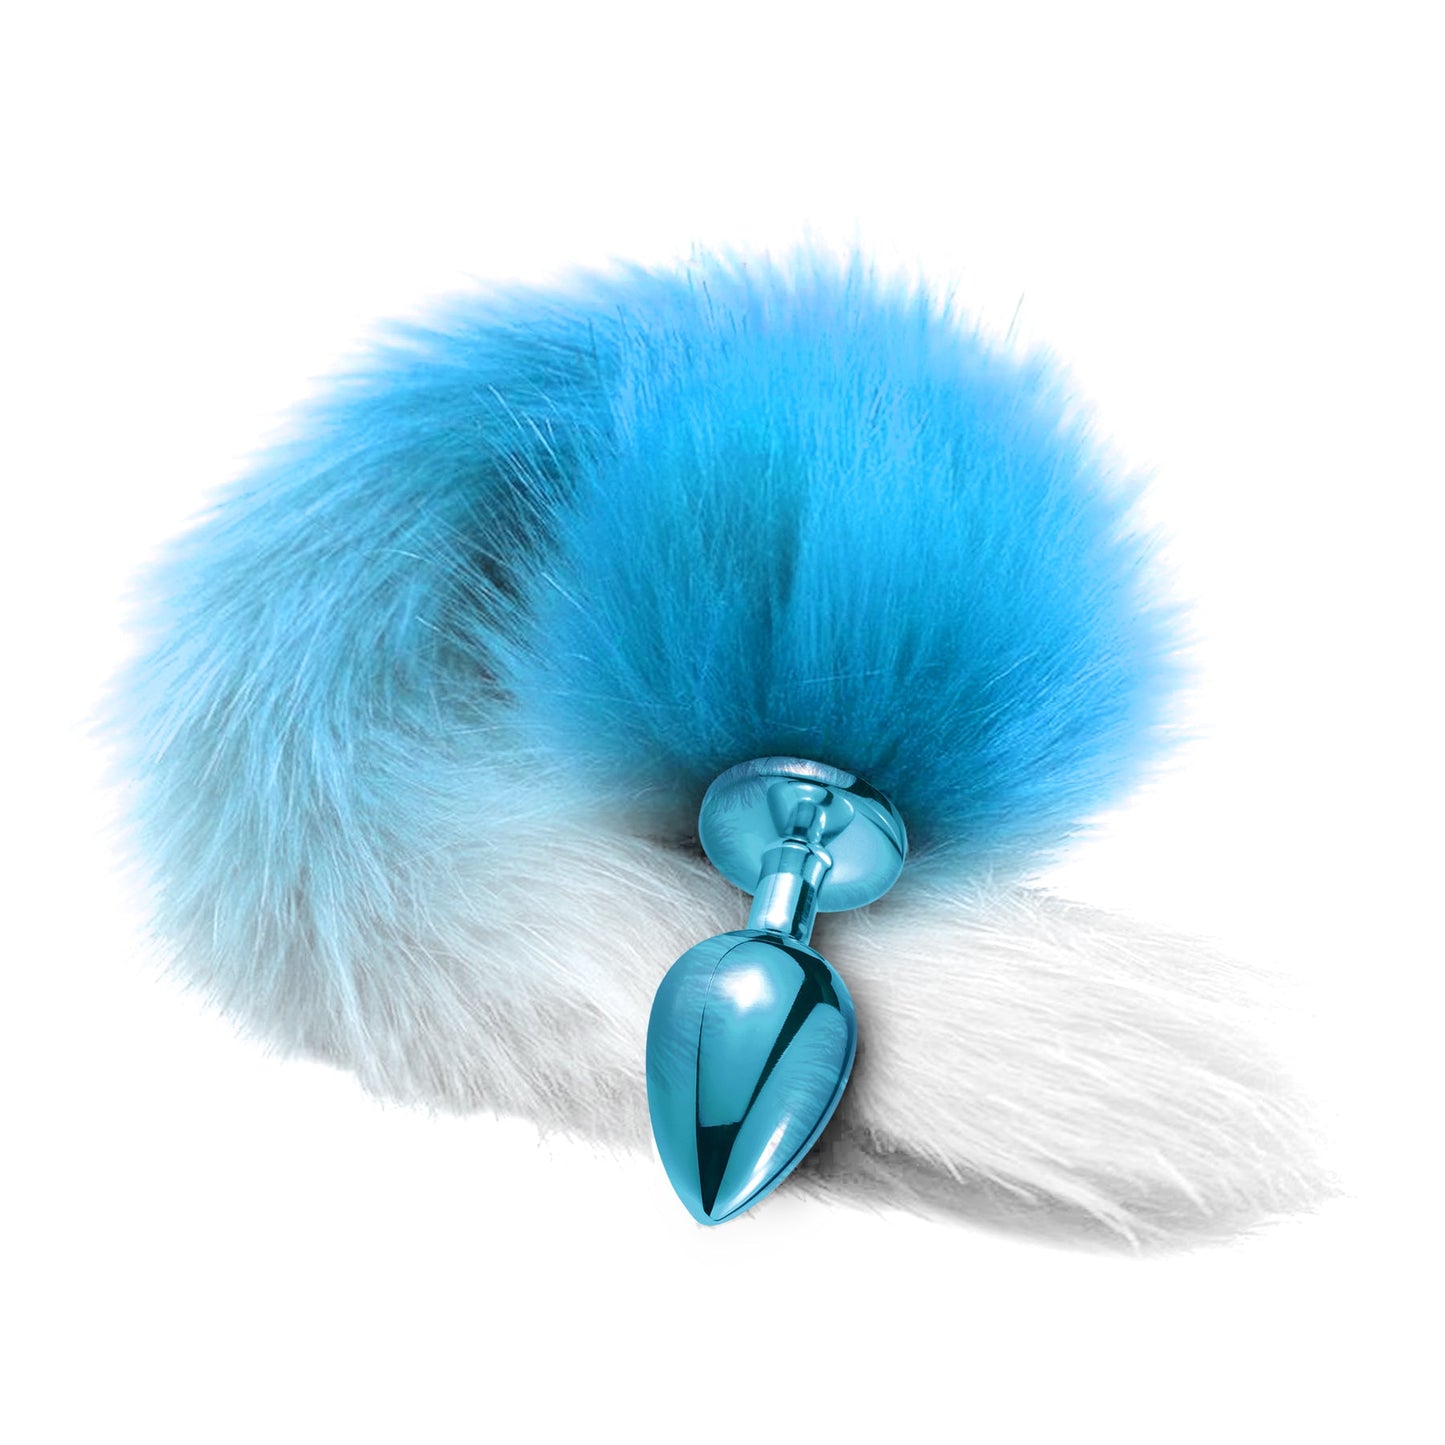 NIXIE Metal Butt Plug with Ombre Tail, Blue - THES